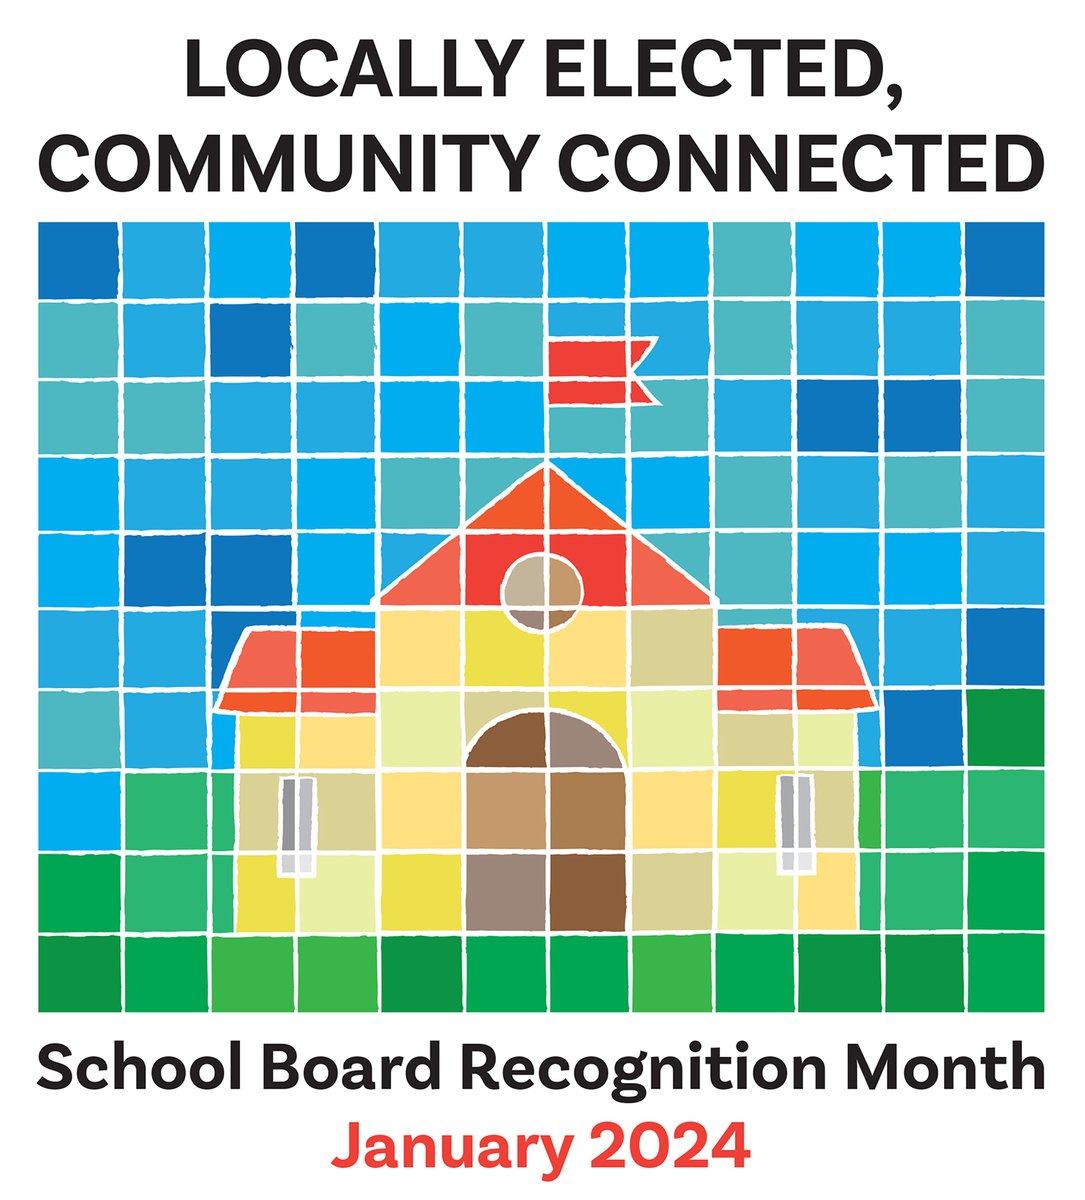 I want to say THANK YOU to each and every Texas trustee during this School Board Recognition Month. The selflessness of volunteer school board members never ceases to amaze me. We at TASB appreciate your commitment and leadership. #SchoolBoardMonth